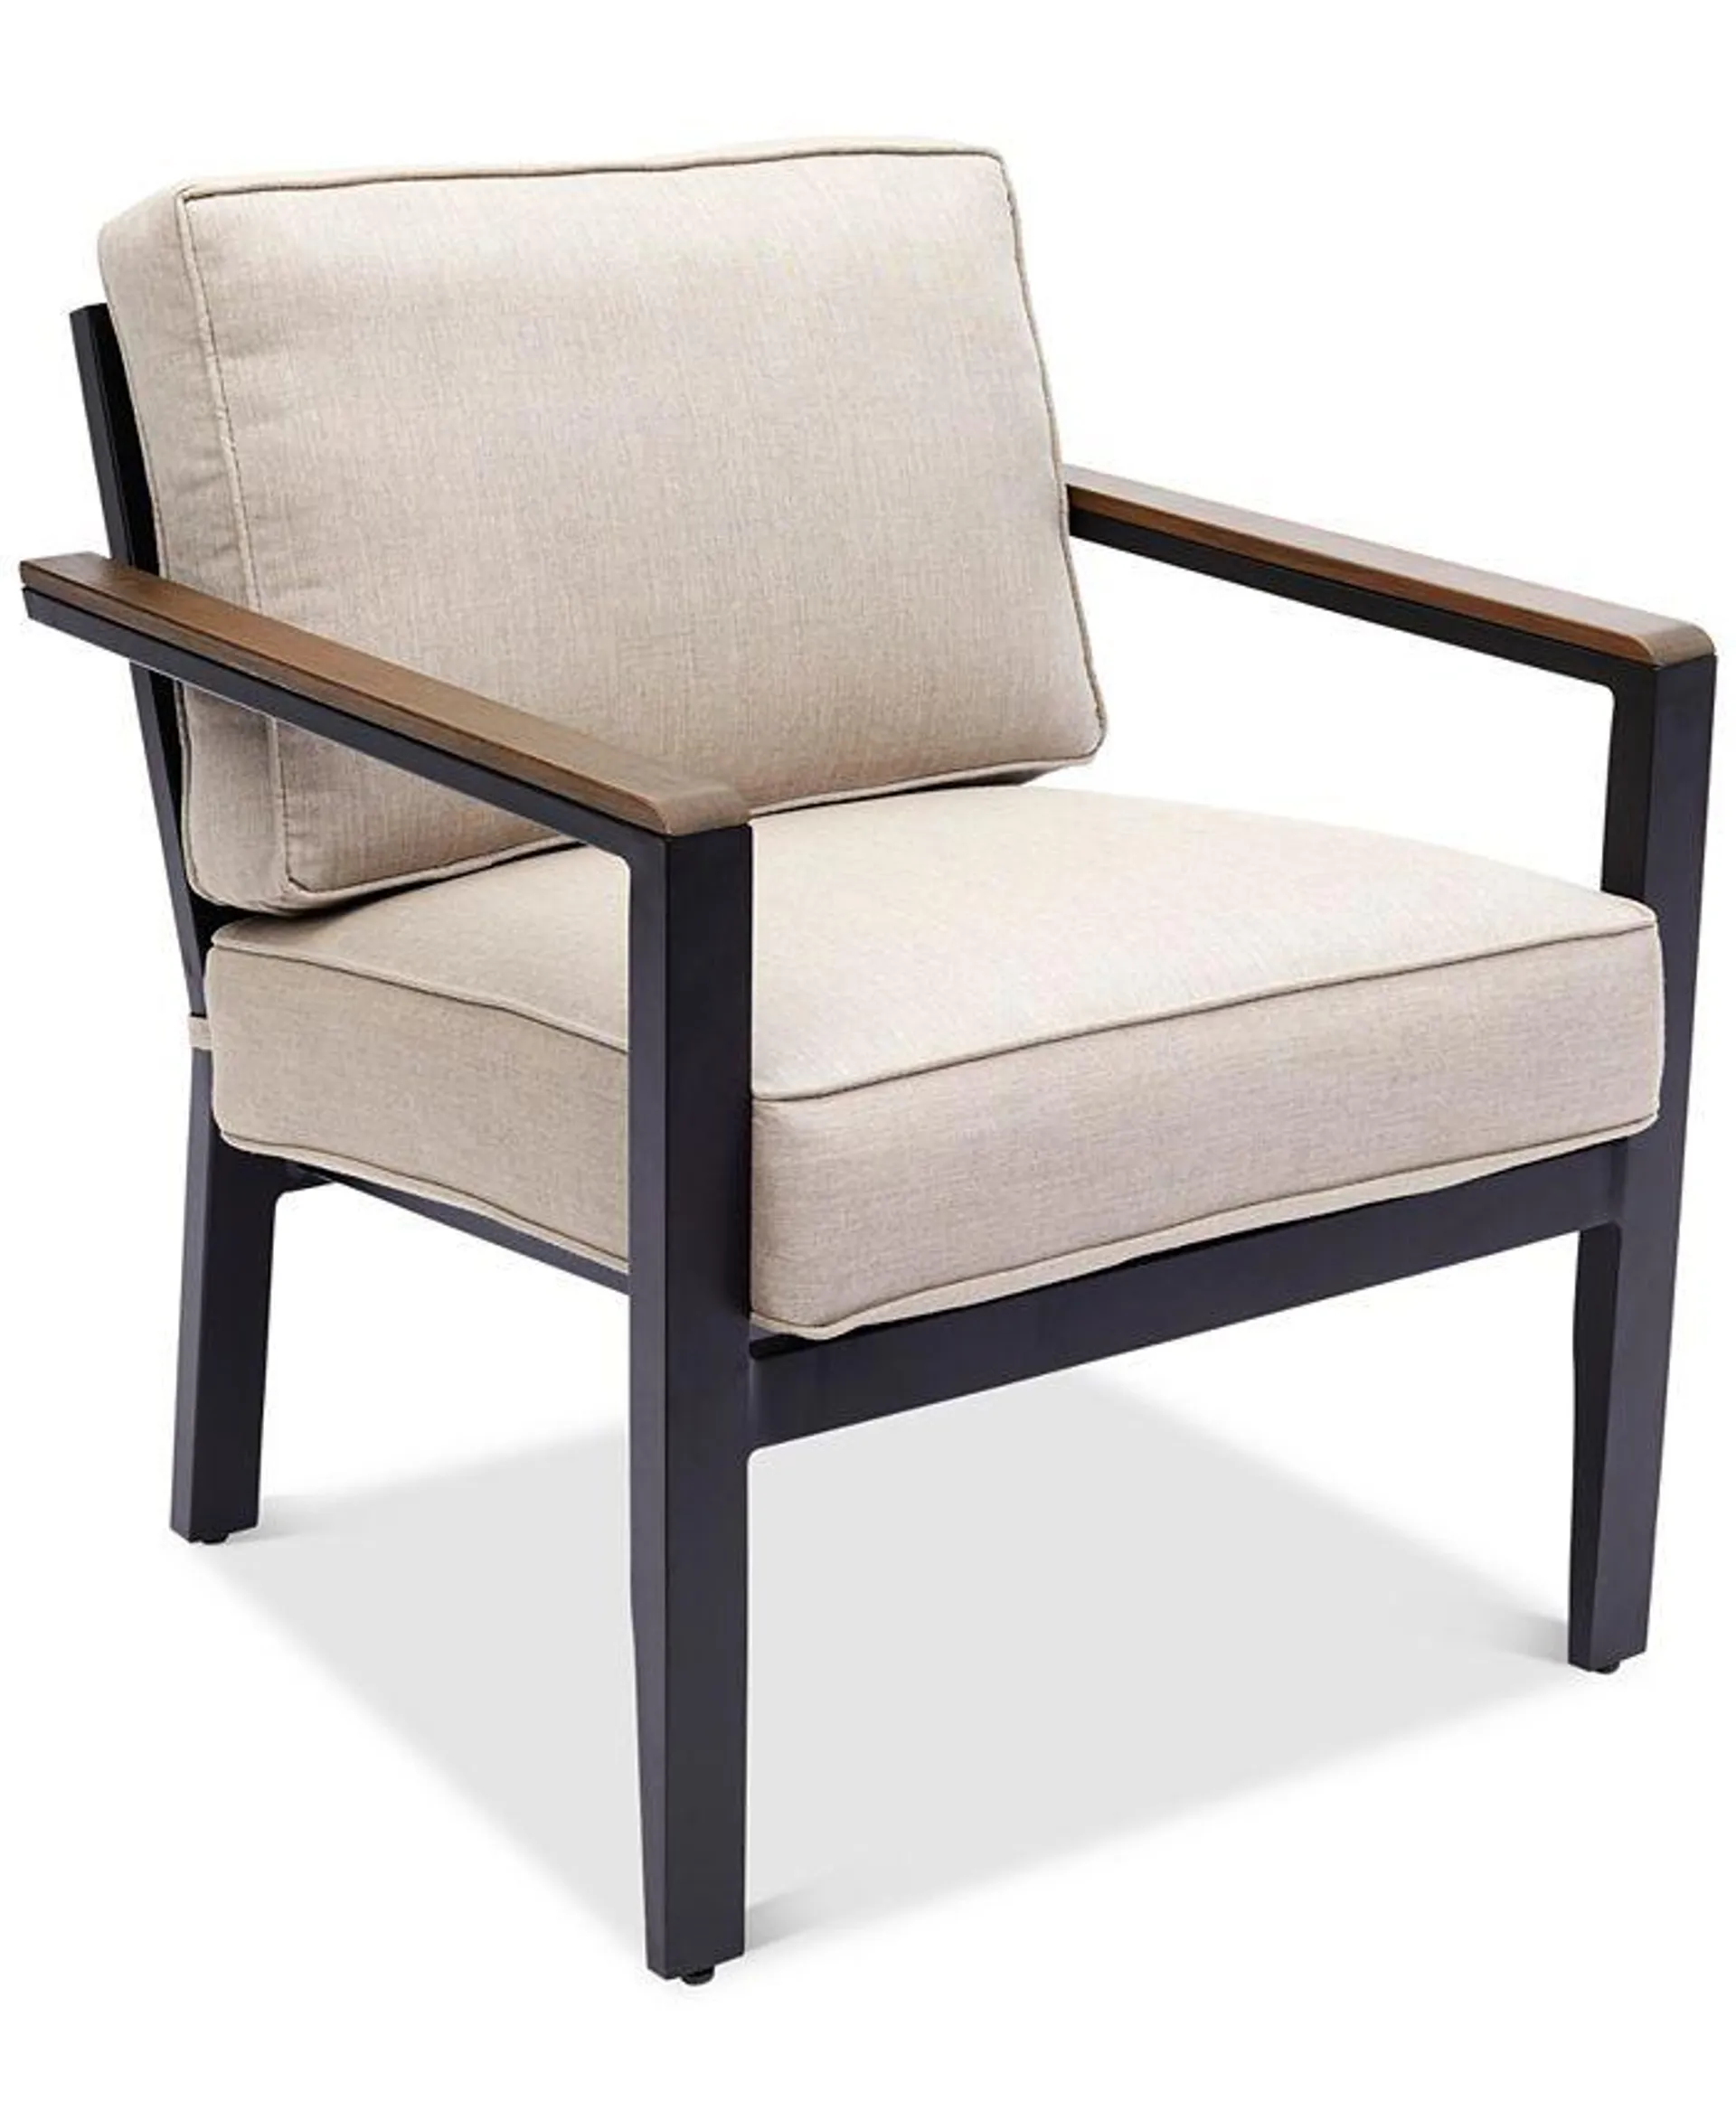 Stockholm Outdoor Club Chair with Outdoor Cushions, Created for Macy's